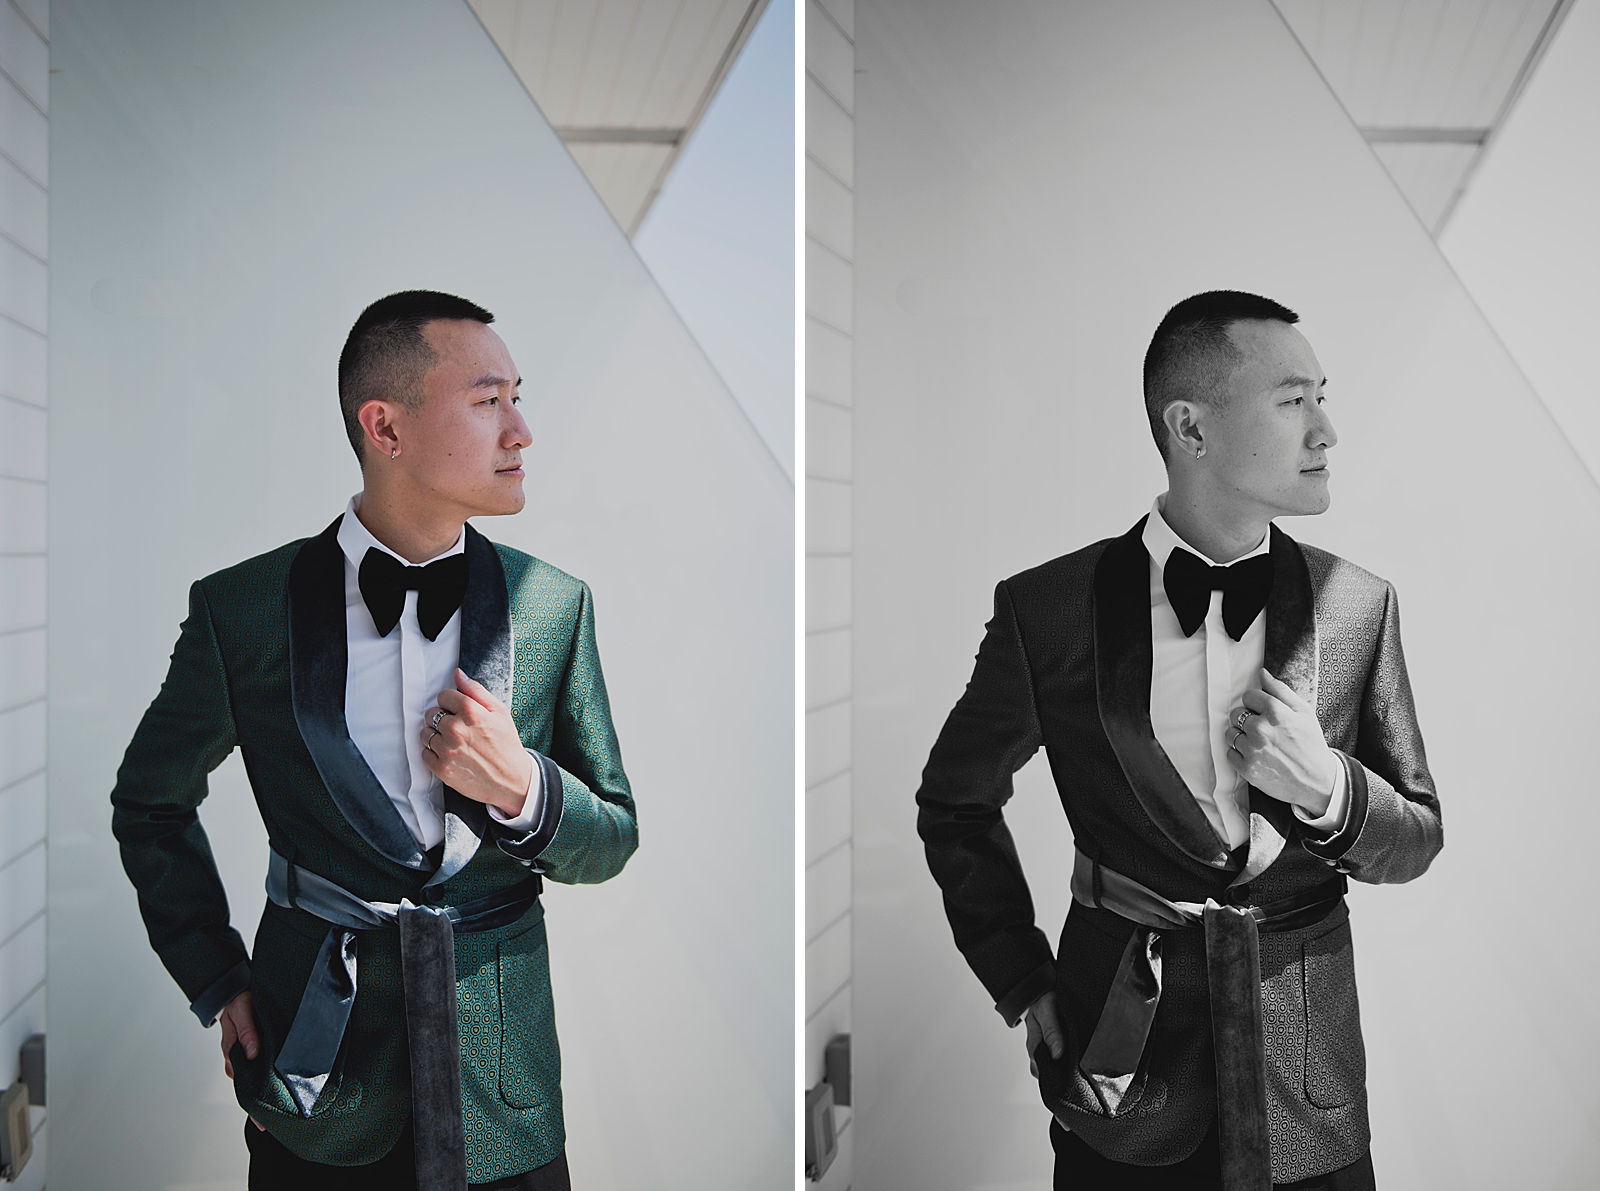 Left photo: Upper body shot of the groom posing while holding his lapel. 
Right photo: Upper body, black and white shot of the groom posing while holding his lapel.